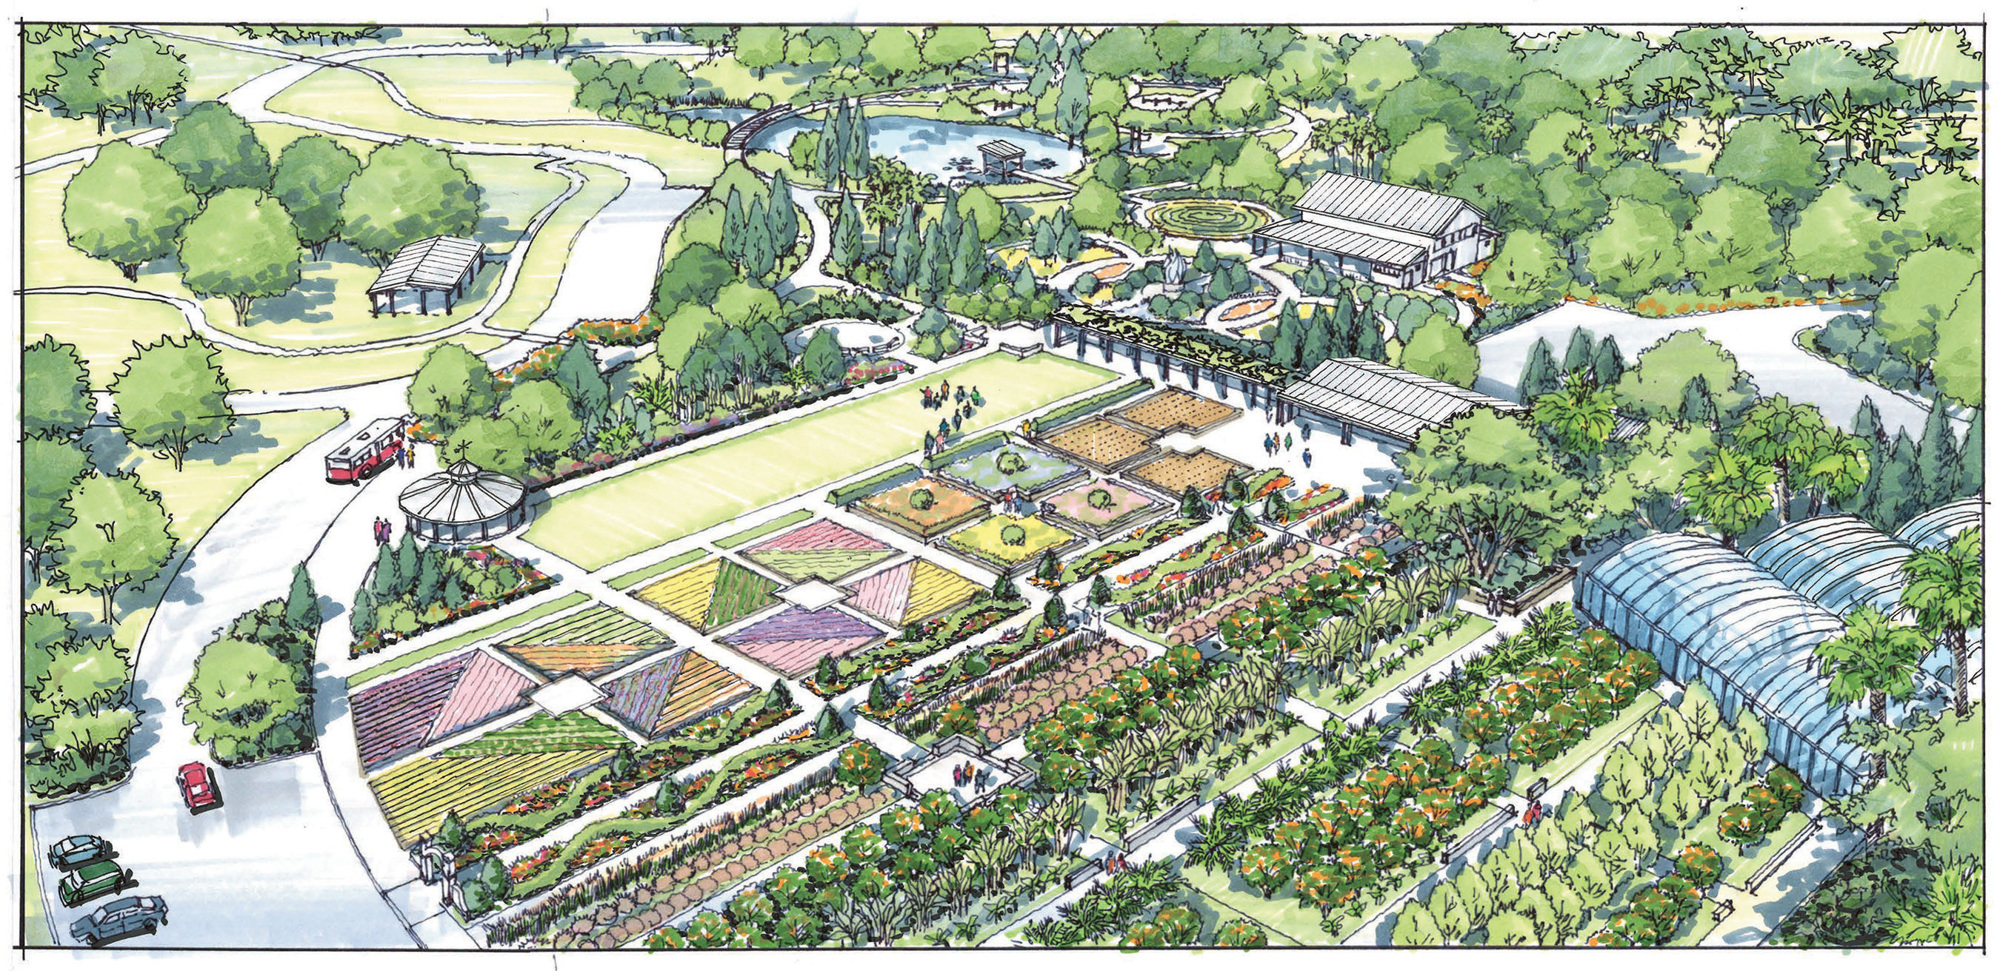 Construction on the health and wellness project at Tucker Ranch could begin in the second quarter of the year.